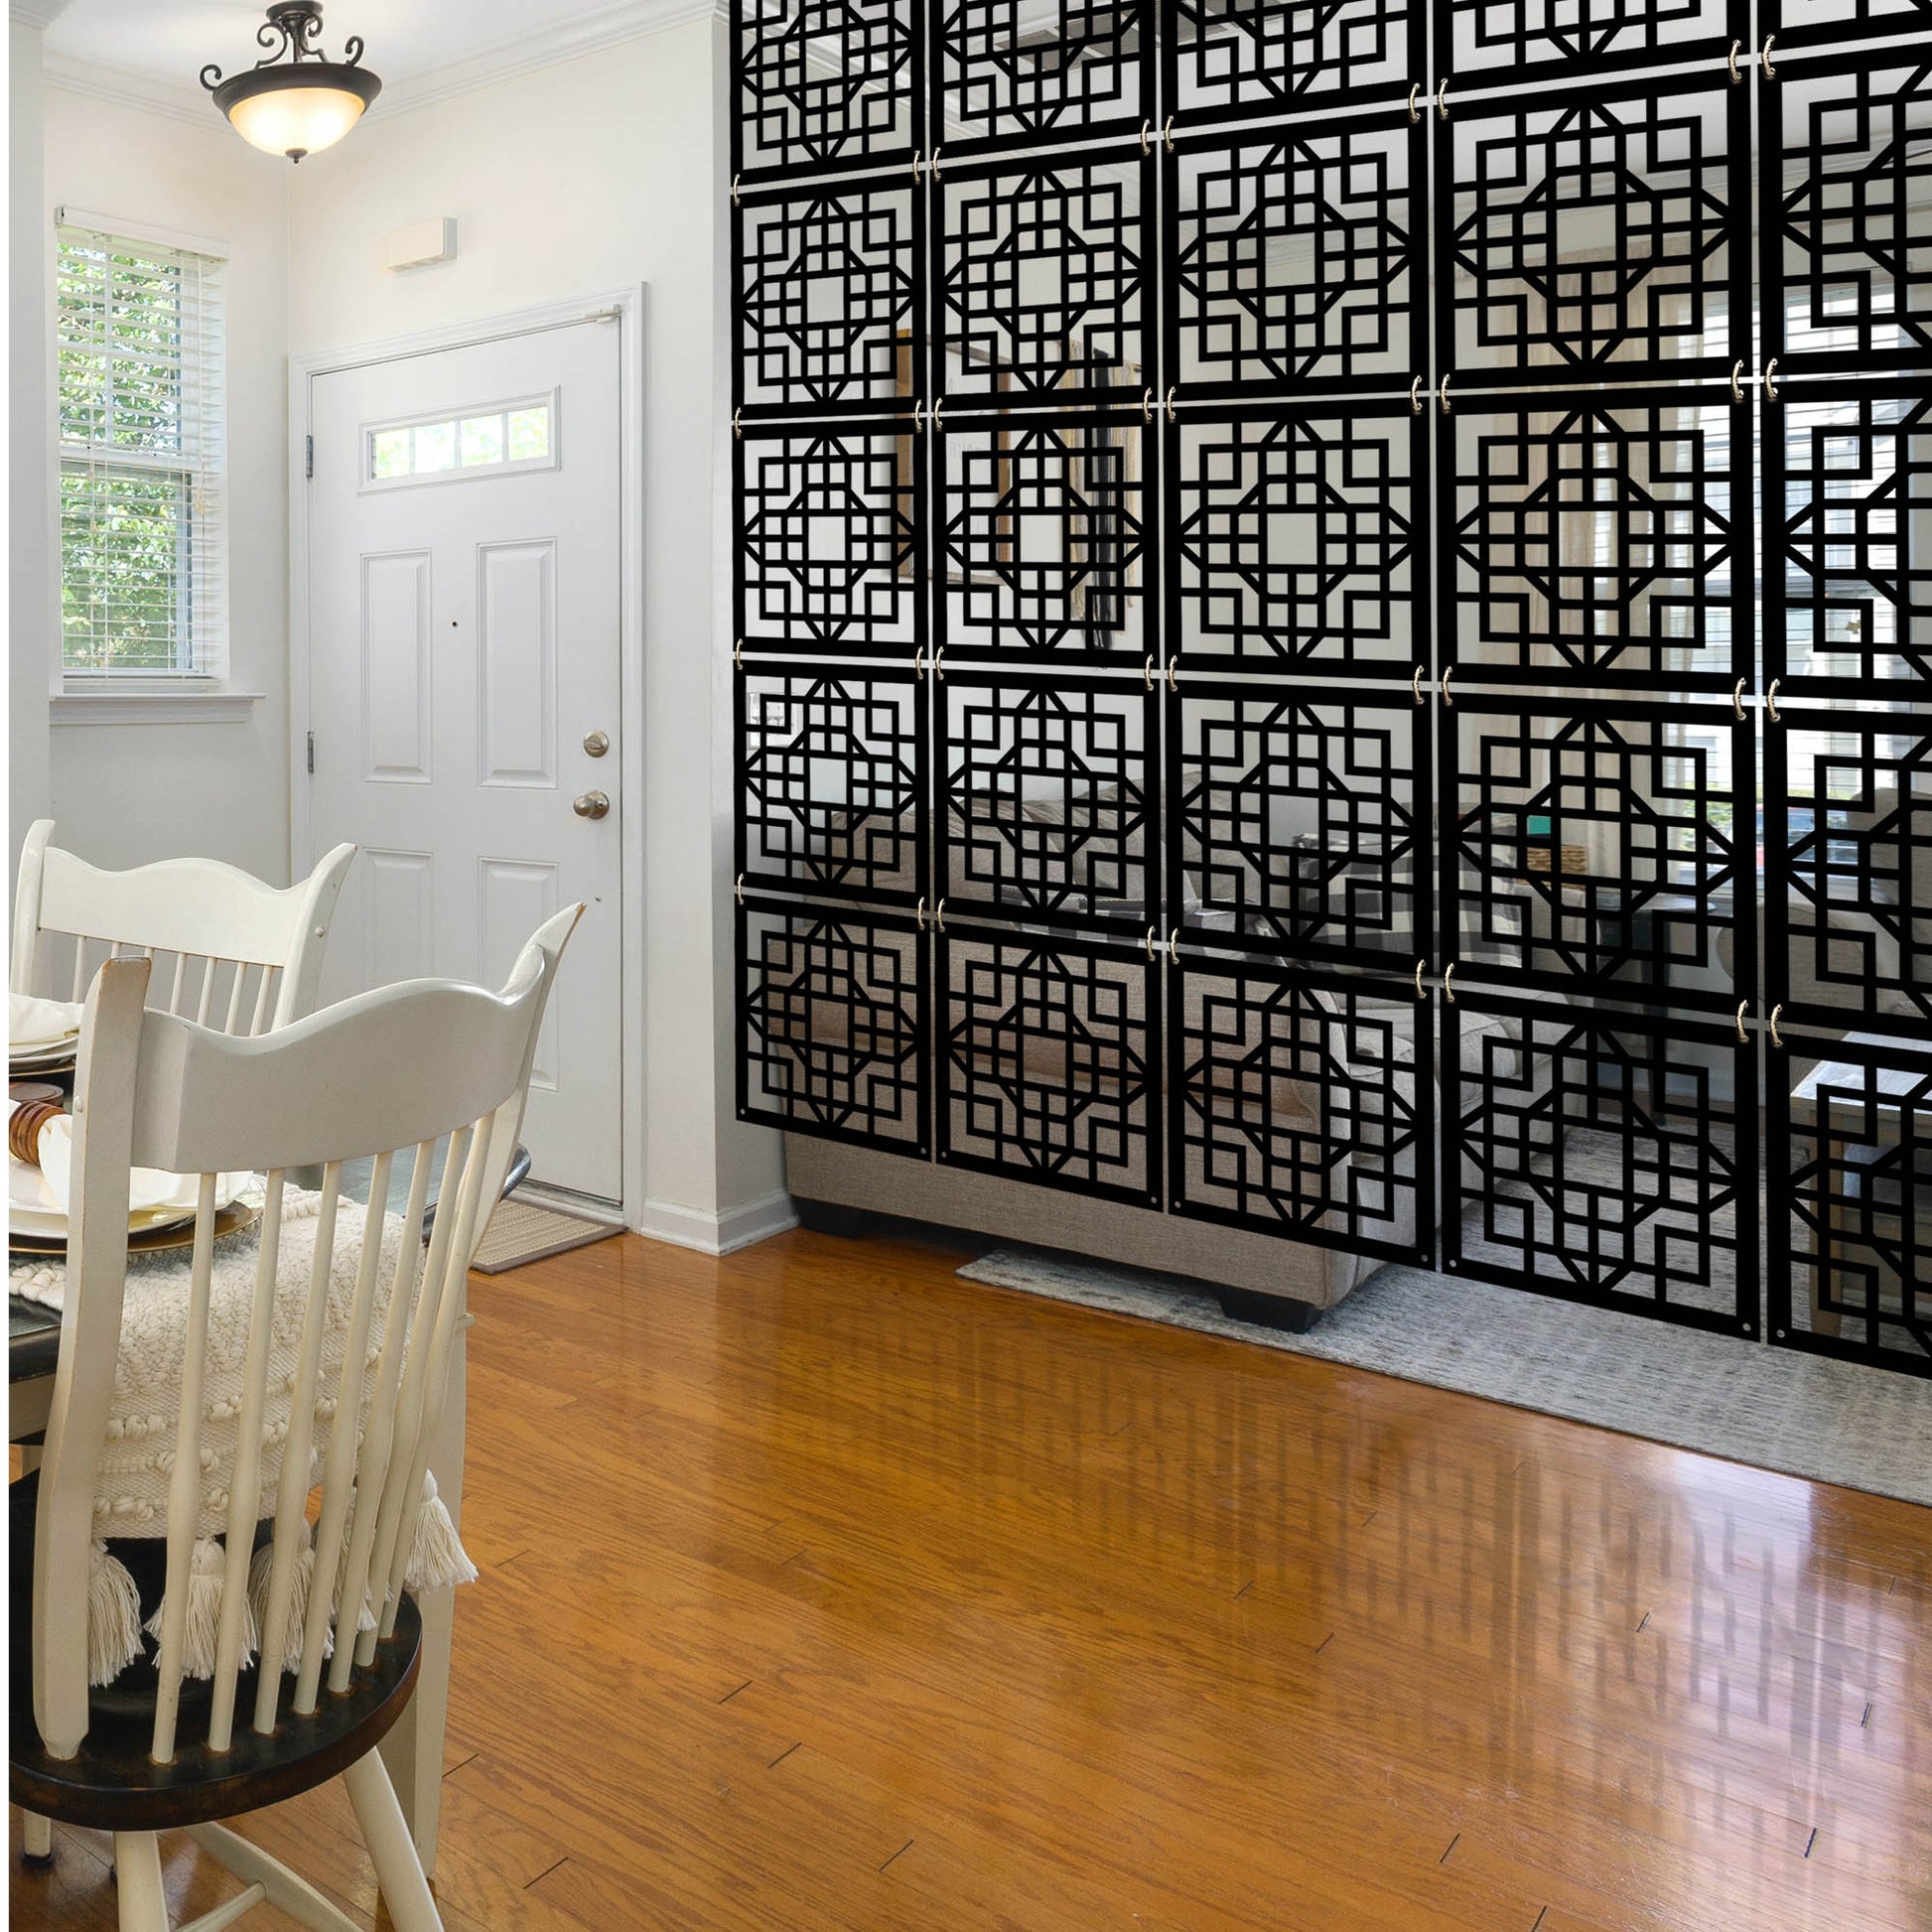 hanging room partitions dividers, Hanging room dividers, Wall Hanging Room Dividers ,Floor to ceiling dividers, wall screen, wall screen room dividers